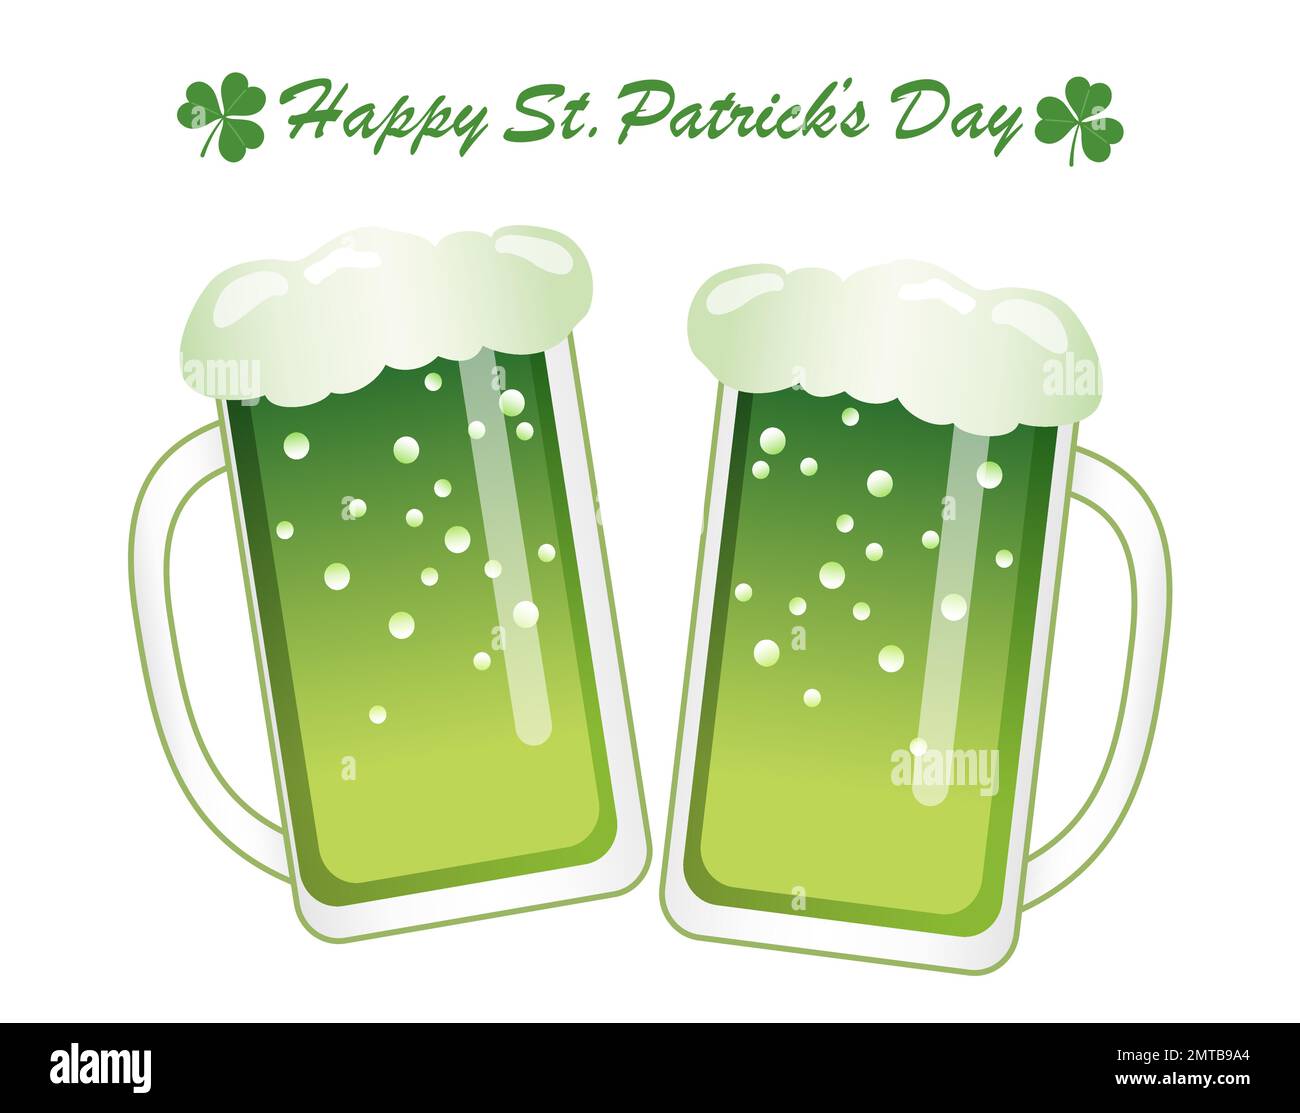 Vector St. Patrick’s Day Green Beer Mugs Illustration Isolated On A White Background. Stock Vector